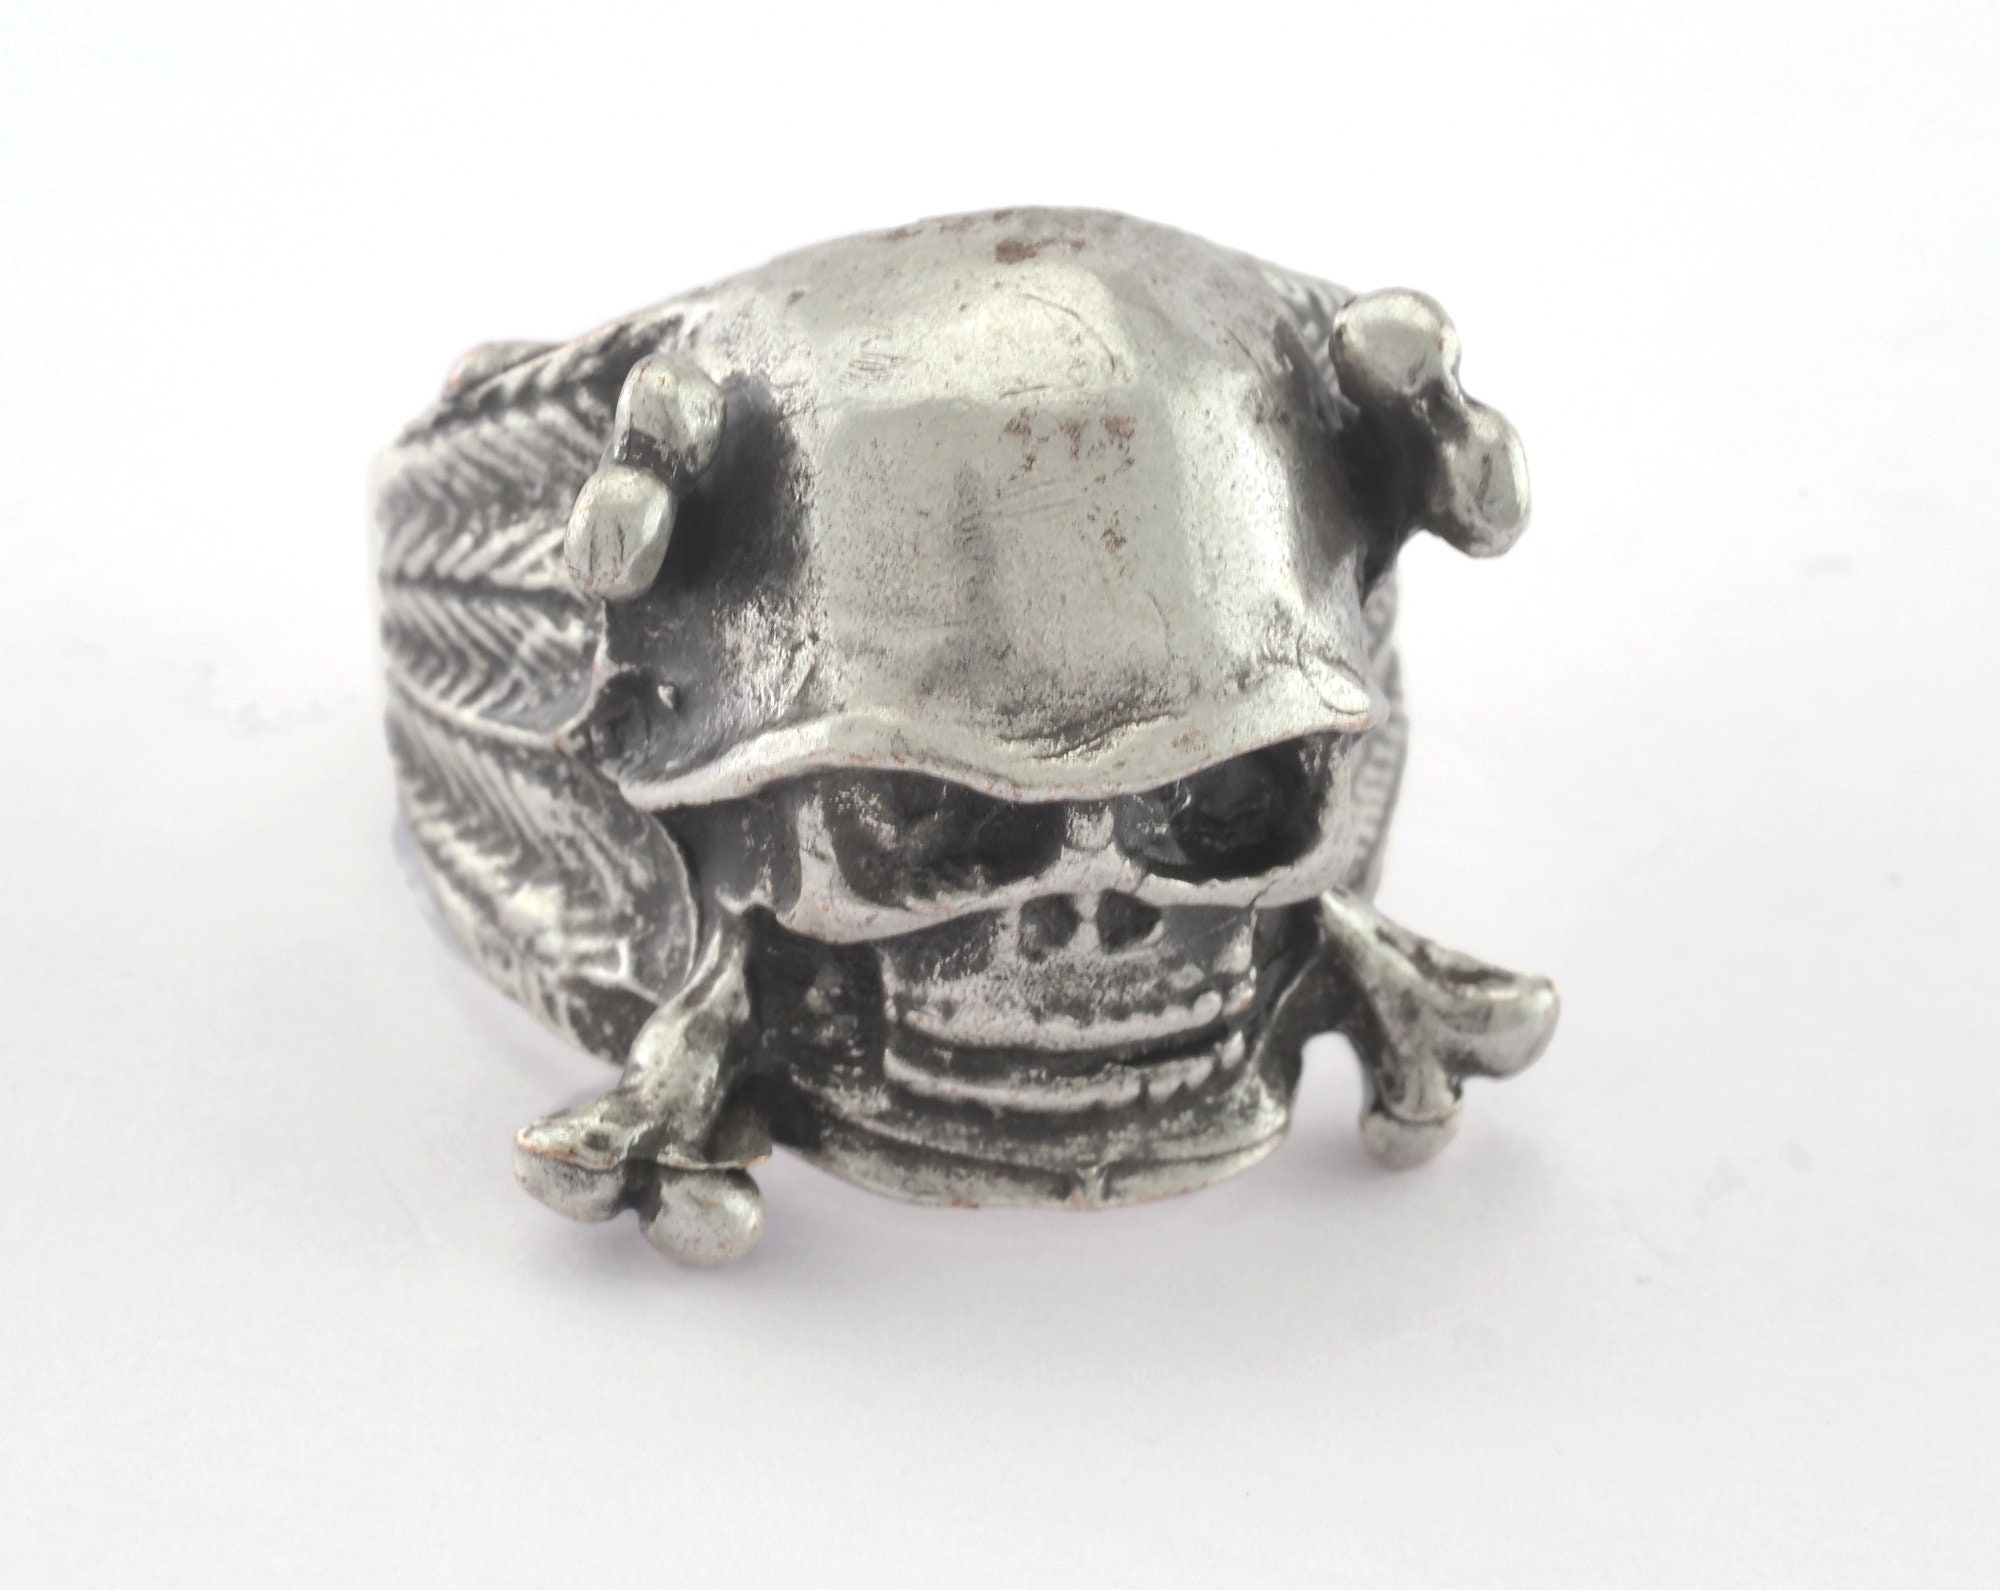 Skull Adjustable Ring Antique Silver Plated Brass 19mm 9US inner size OZ3265